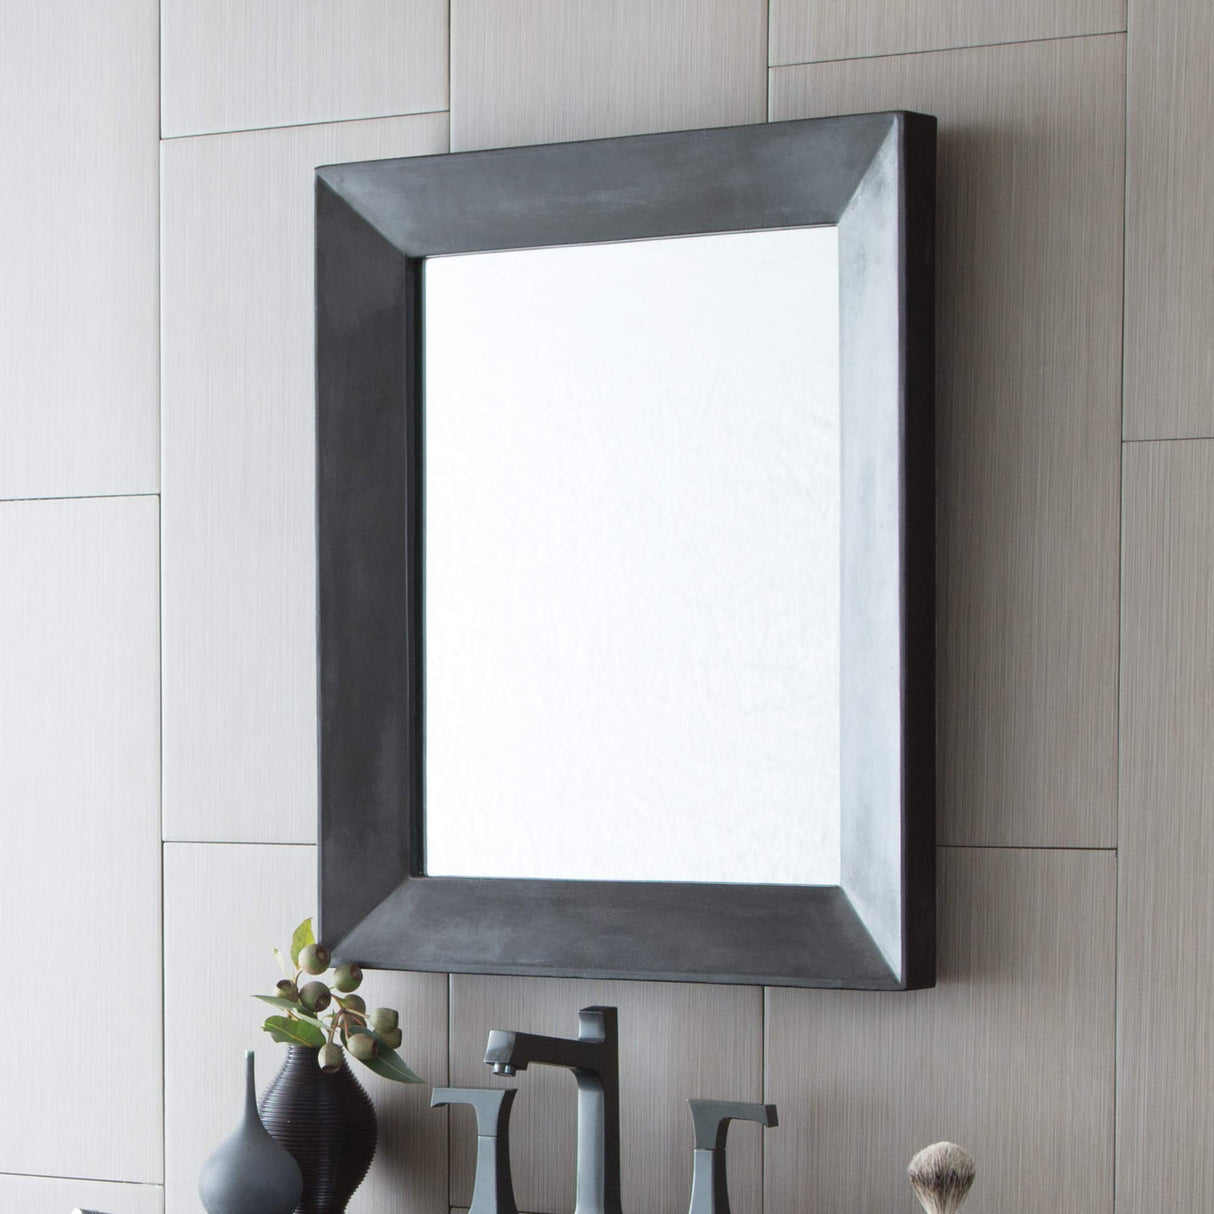 Native Trails Portola Concrete Rectangular Wall Mirror in Slate NSMR2622-S (22-inch Width x 26-inch Height x 2.5-inch Thickness) - Bathroom or Accent Mirror